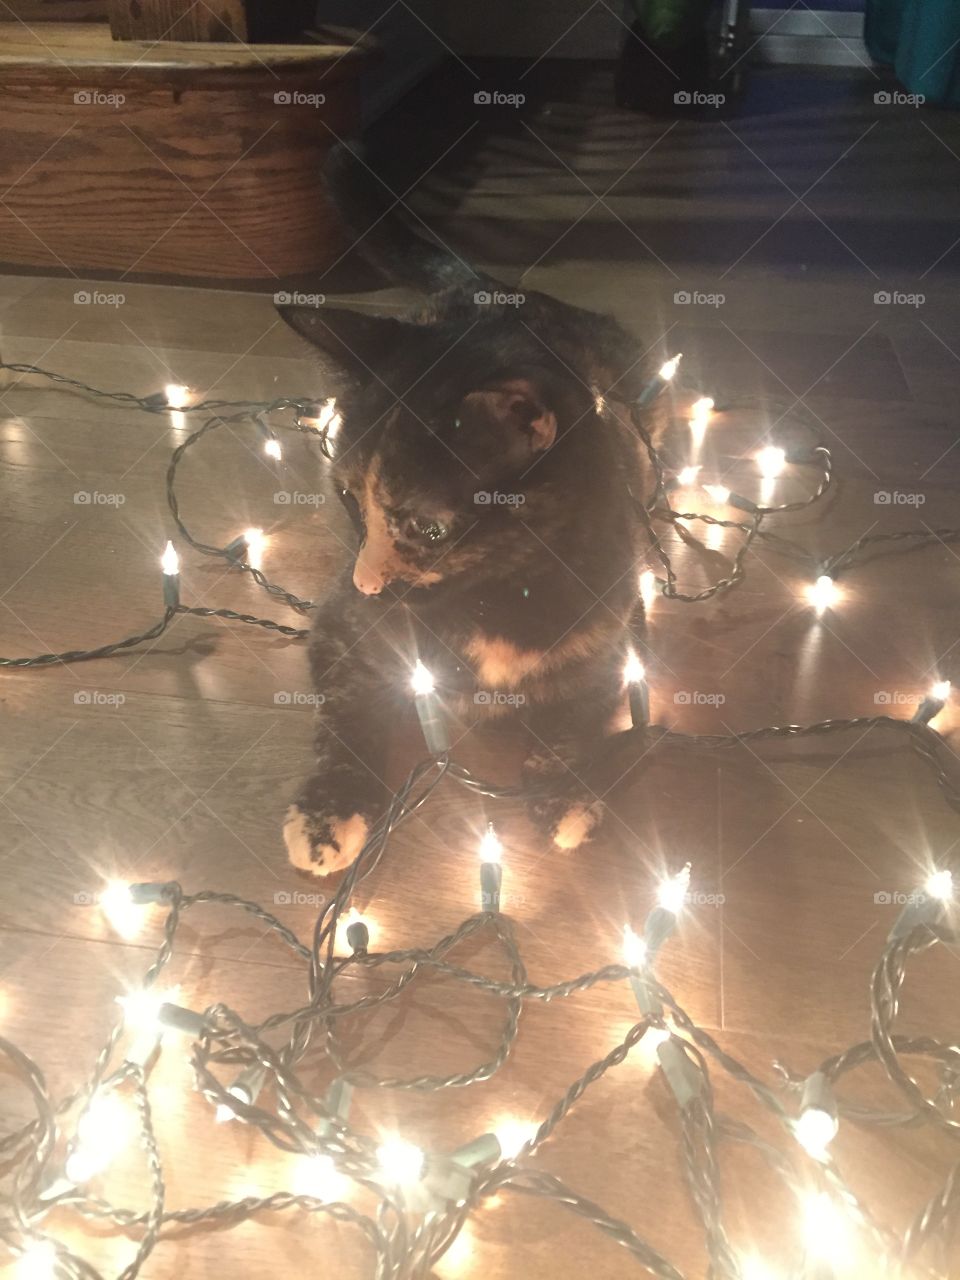 Kahlua helping decorate for Christmas